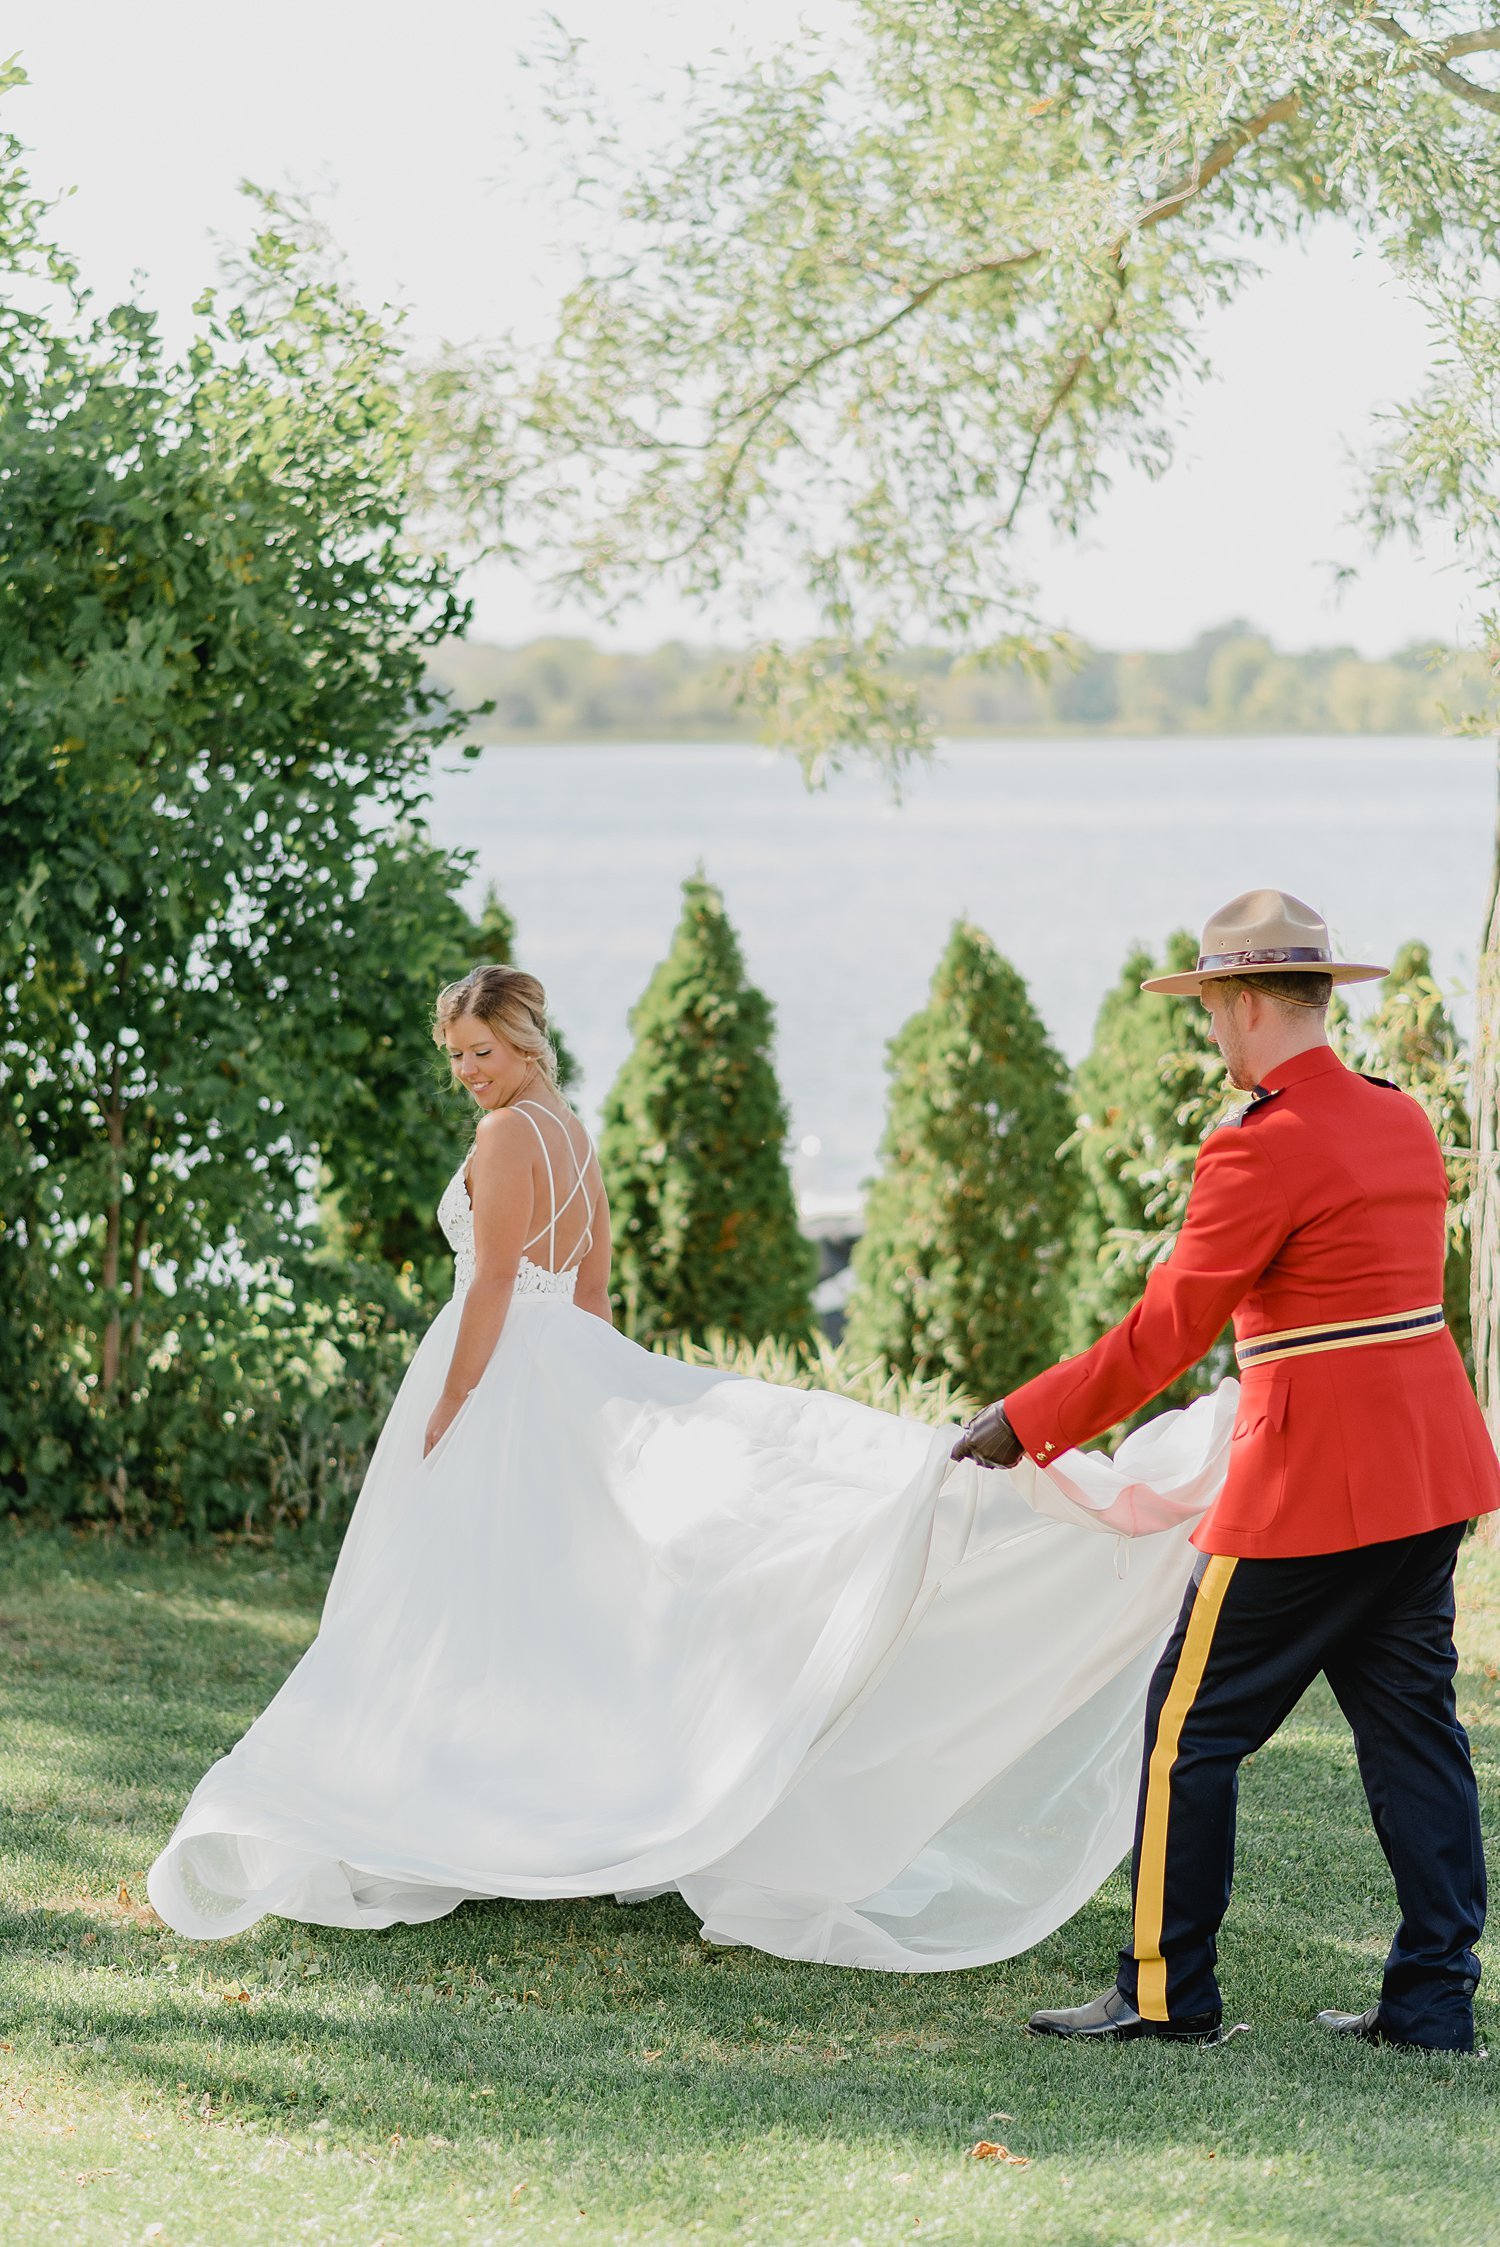 A Royal Canadian Mountie's Intimate Summer Wedding in Prince Edward County | Prince Edward County Wedding Photographer | Holly McMurter Photographs_0037.jpg